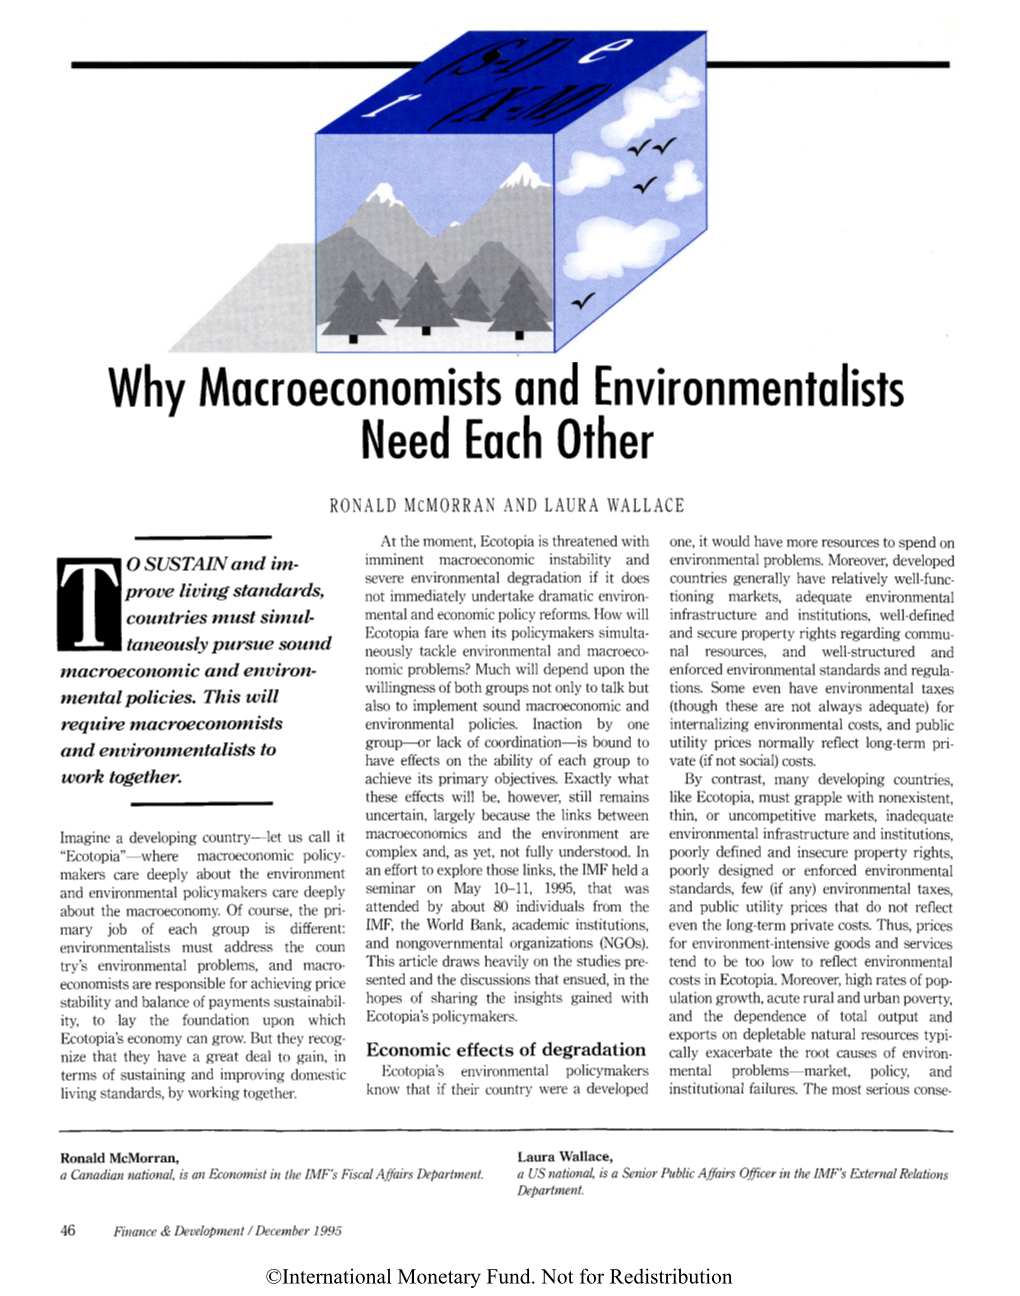 Why Mcicroeconomists and Environmentalists Need Each Other RONALD MCMORRAN and LAURA WALLACE